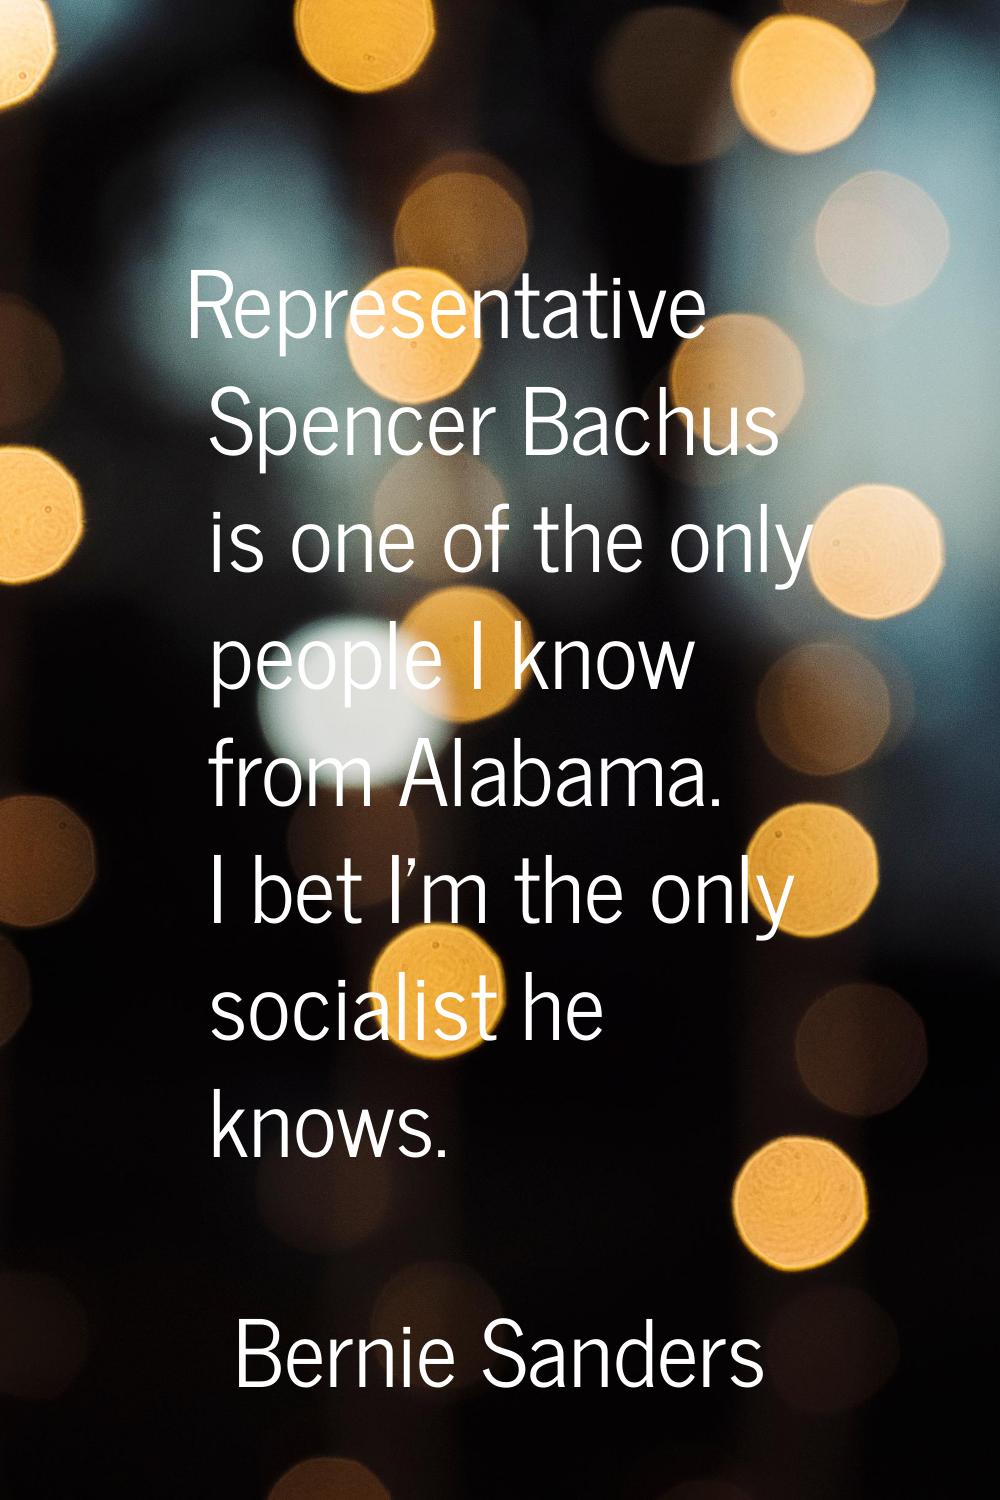 Representative Spencer Bachus is one of the only people I know from Alabama. I bet I'm the only soc